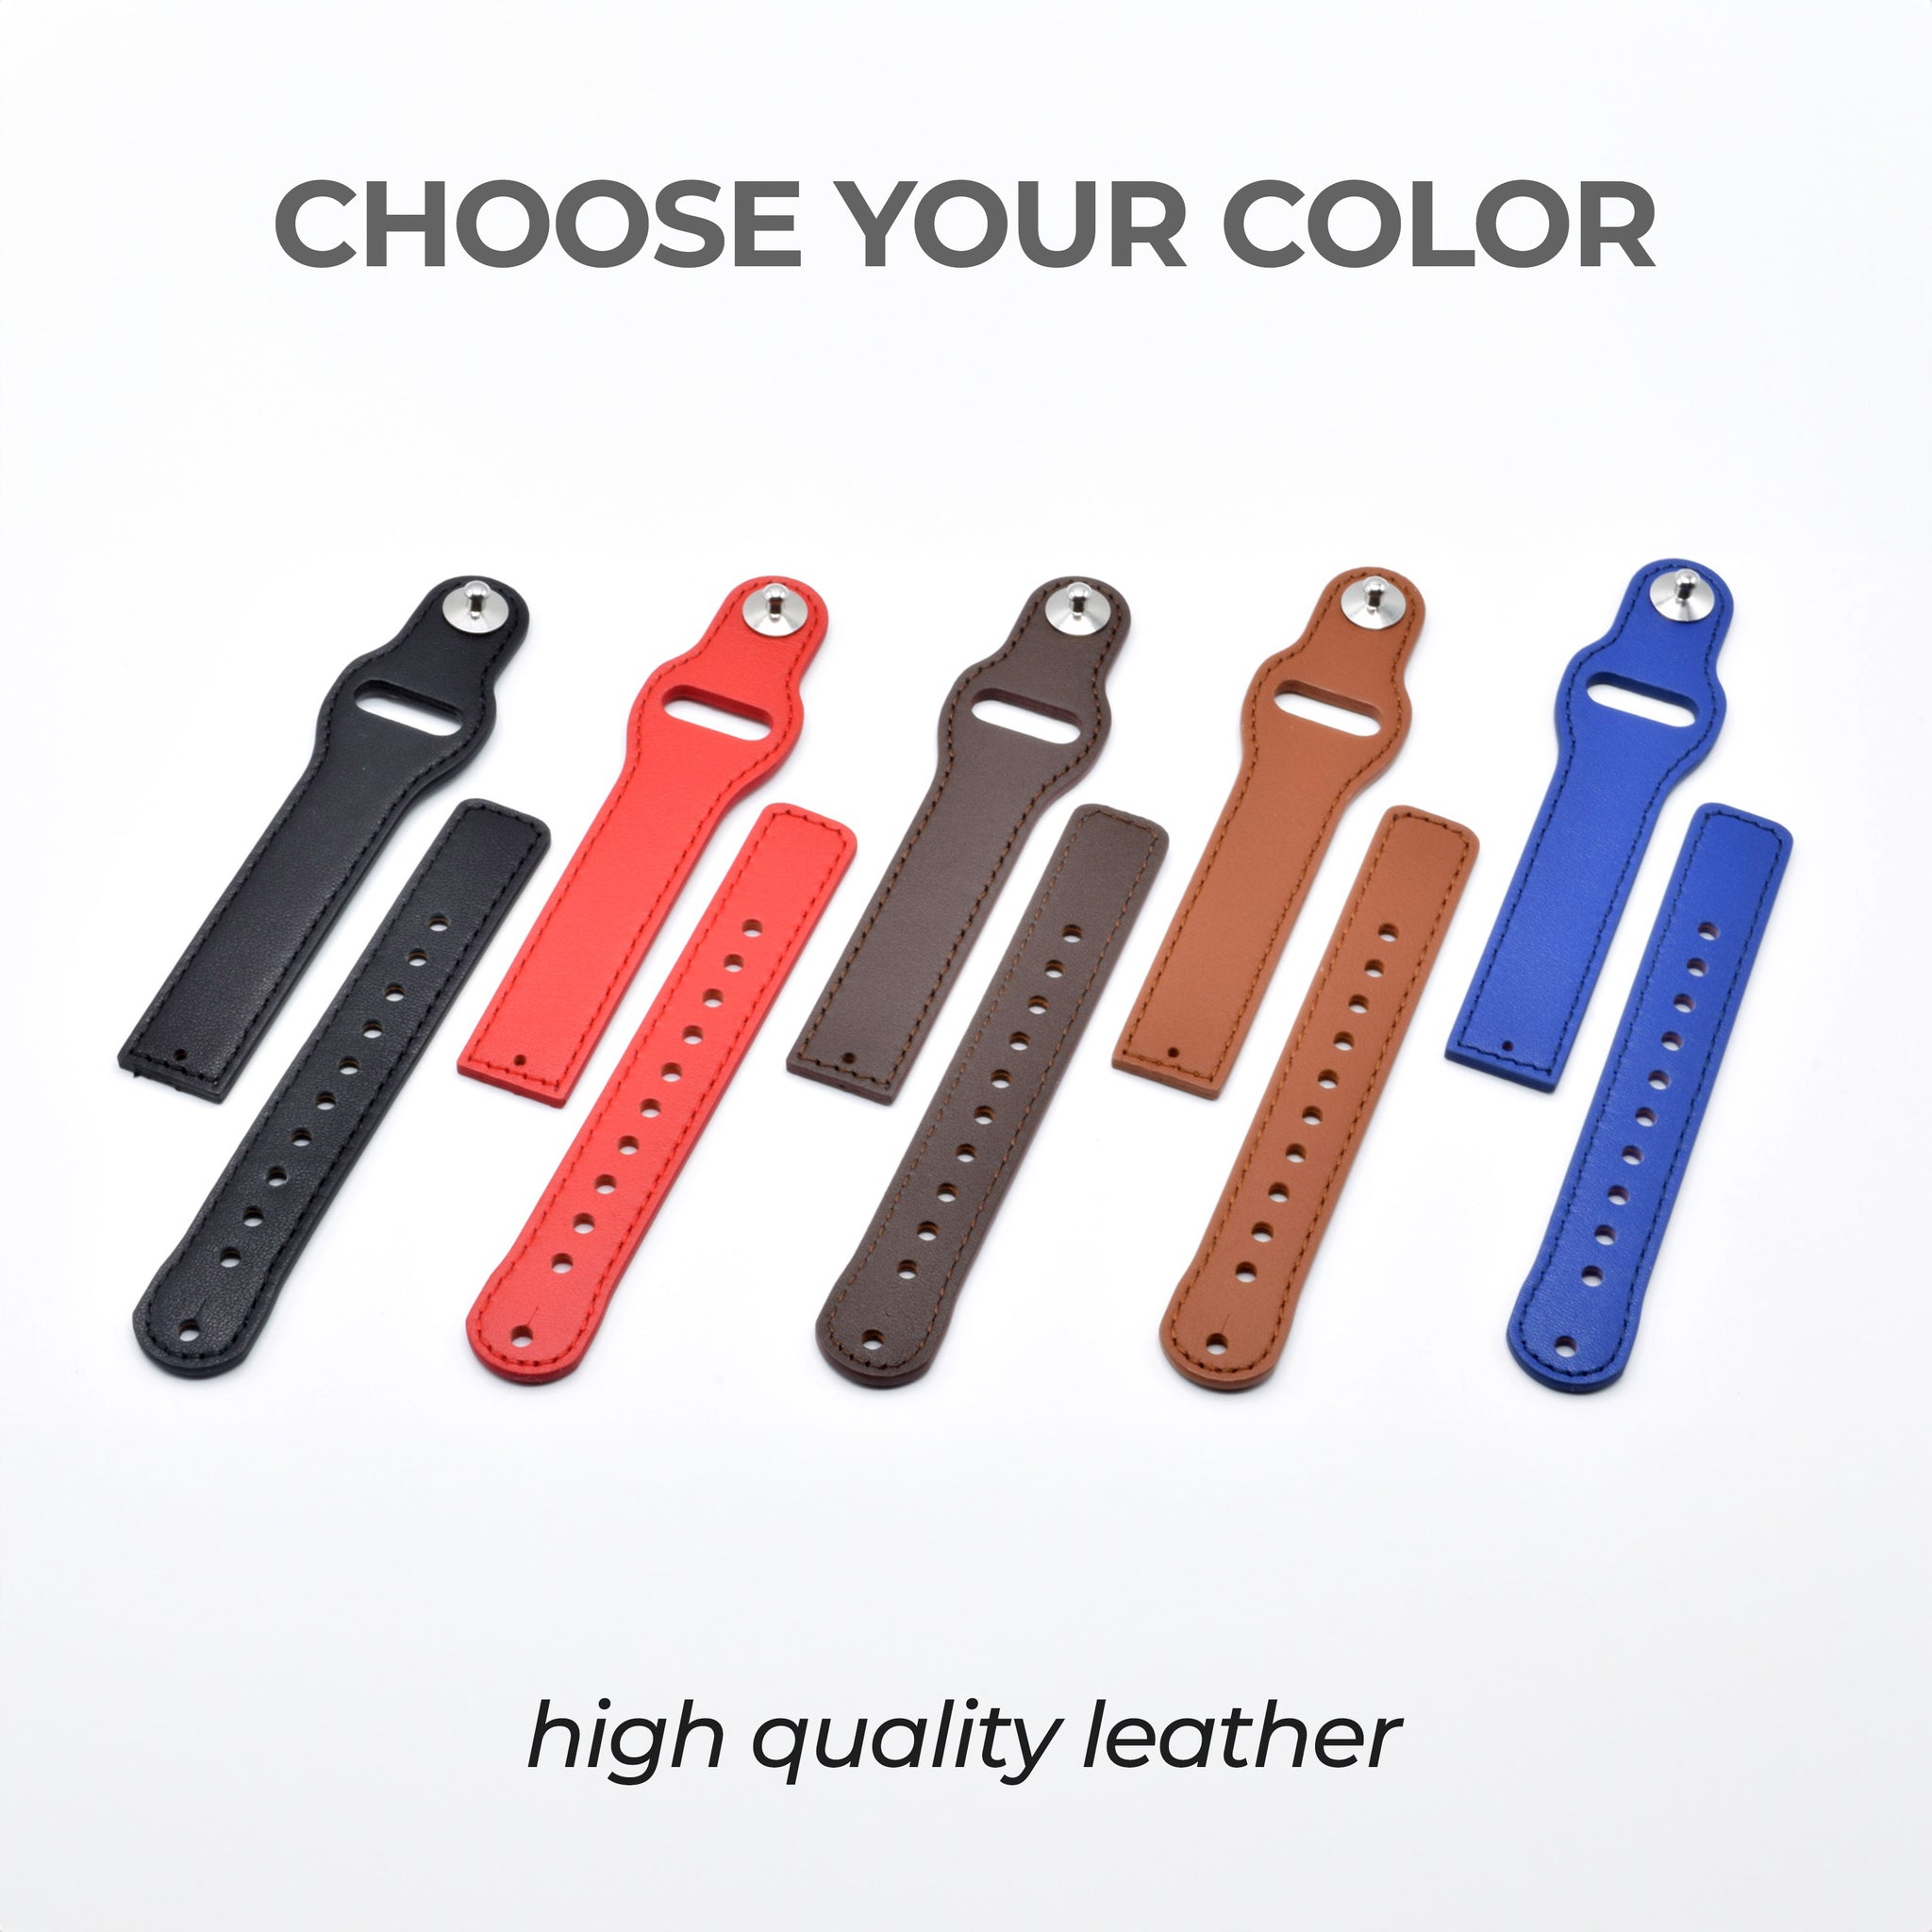 With Gema, personalize your leather color band